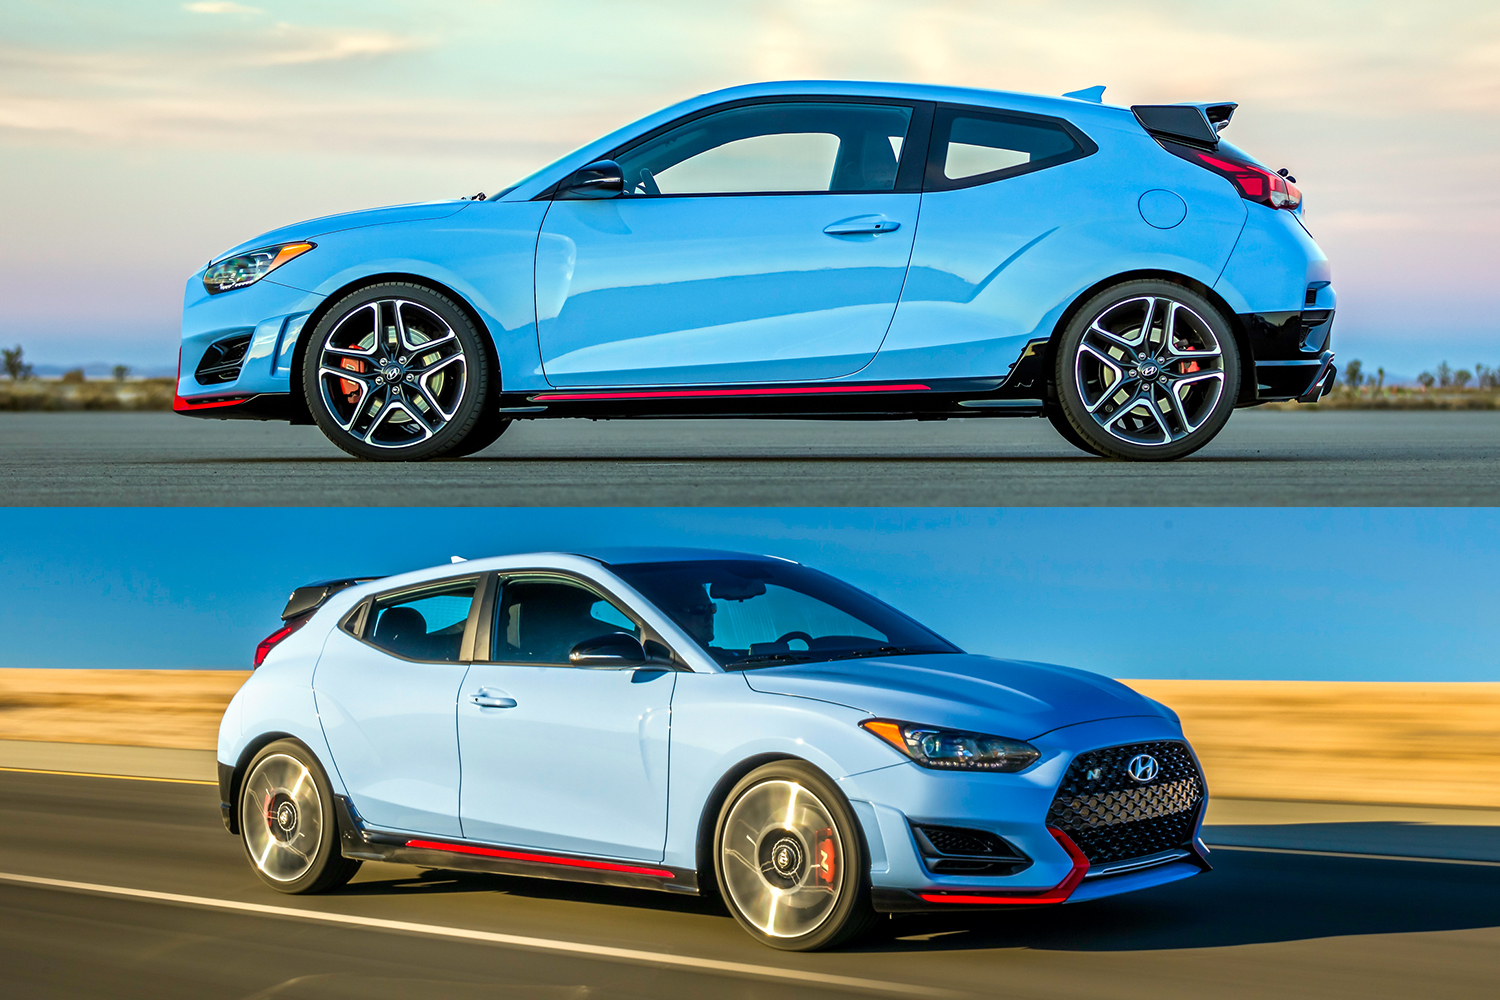 The 2022 Hyundai Veloster N, the top photo showing the driver's side with one door, the bottom photo showing the passenger's side with two doors